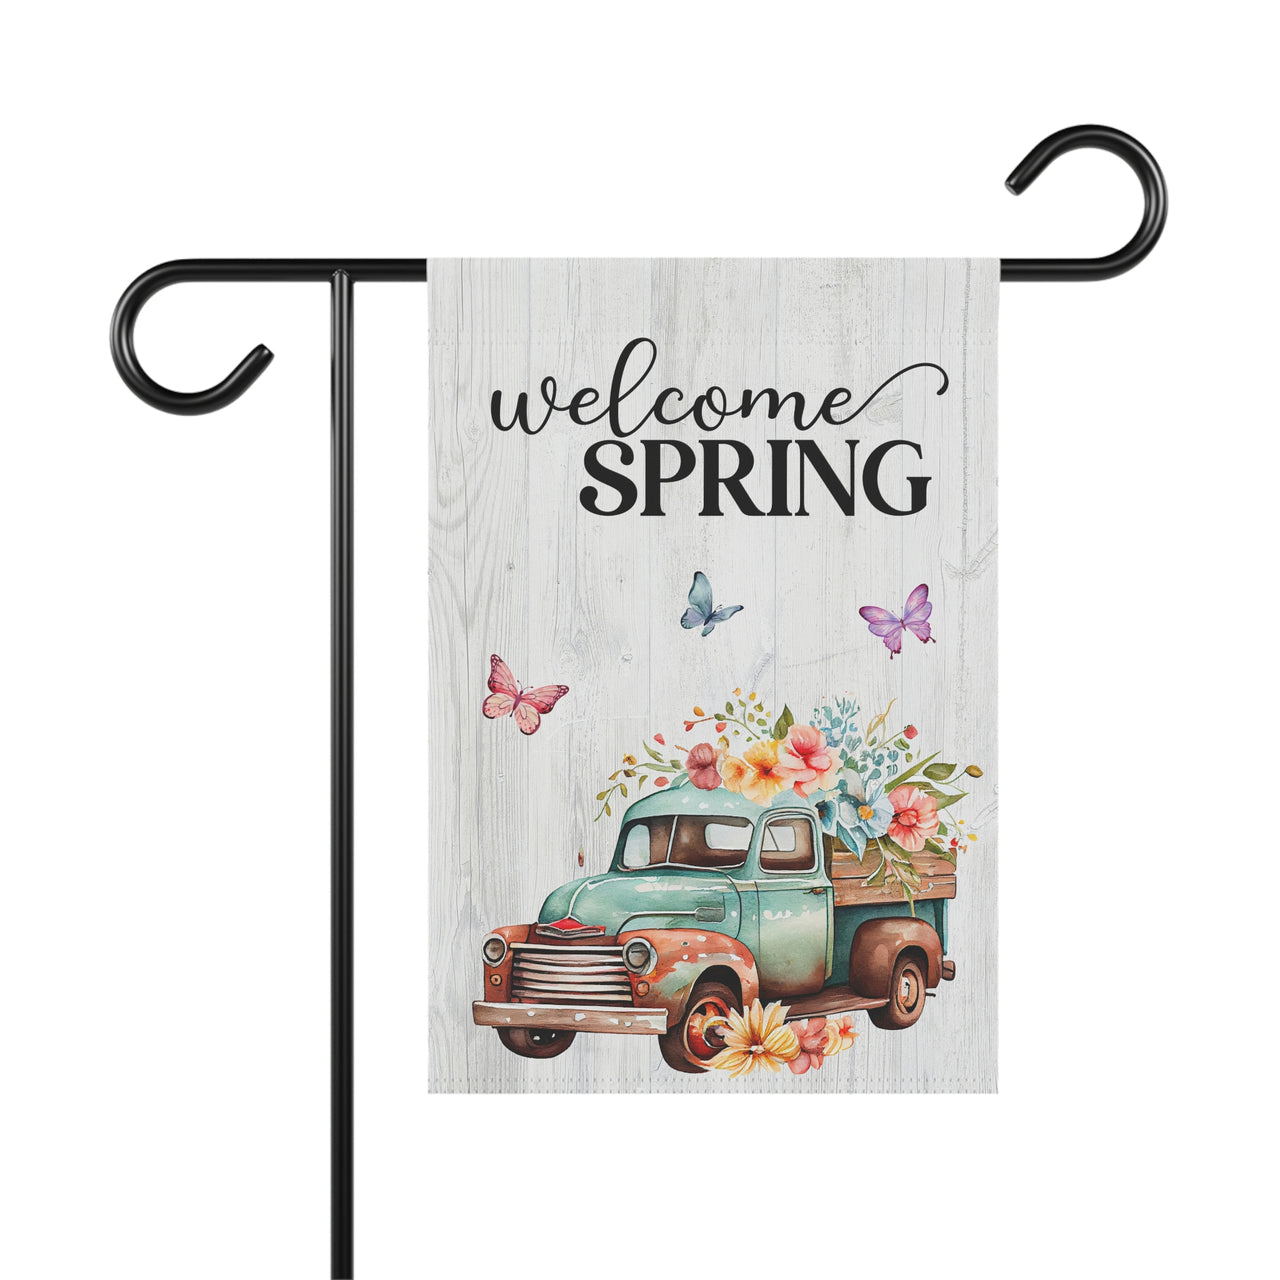 Welcome Spring Garden Flag - Vintage Truck with Flowers